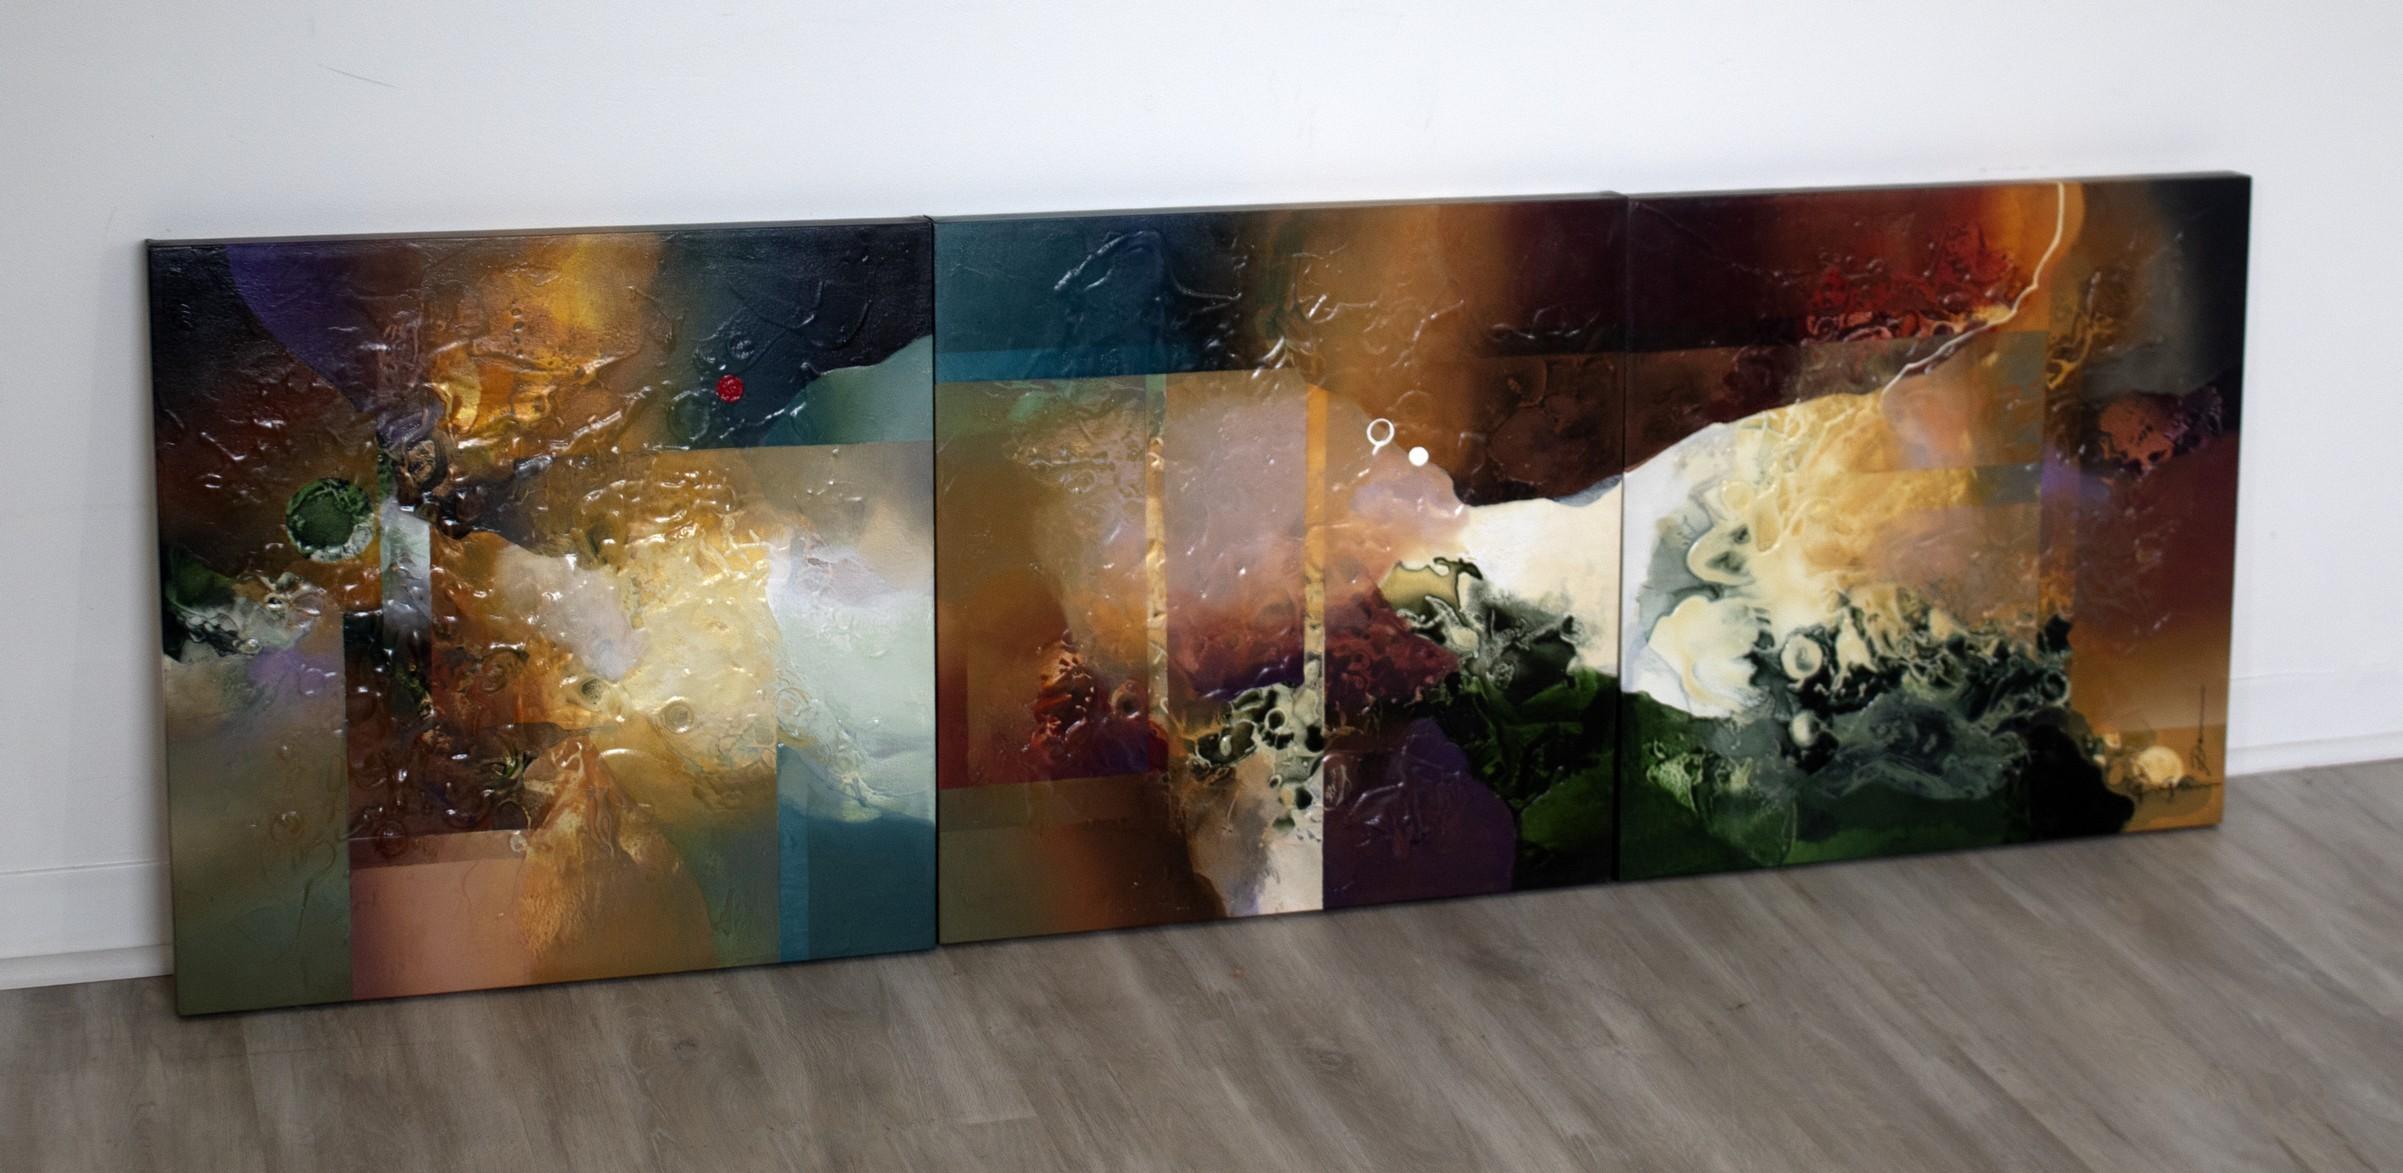 For your consideration is a magnificent abstract acrylic triptych, by Chinese artist Pan Qi-Qun. Each panel 24